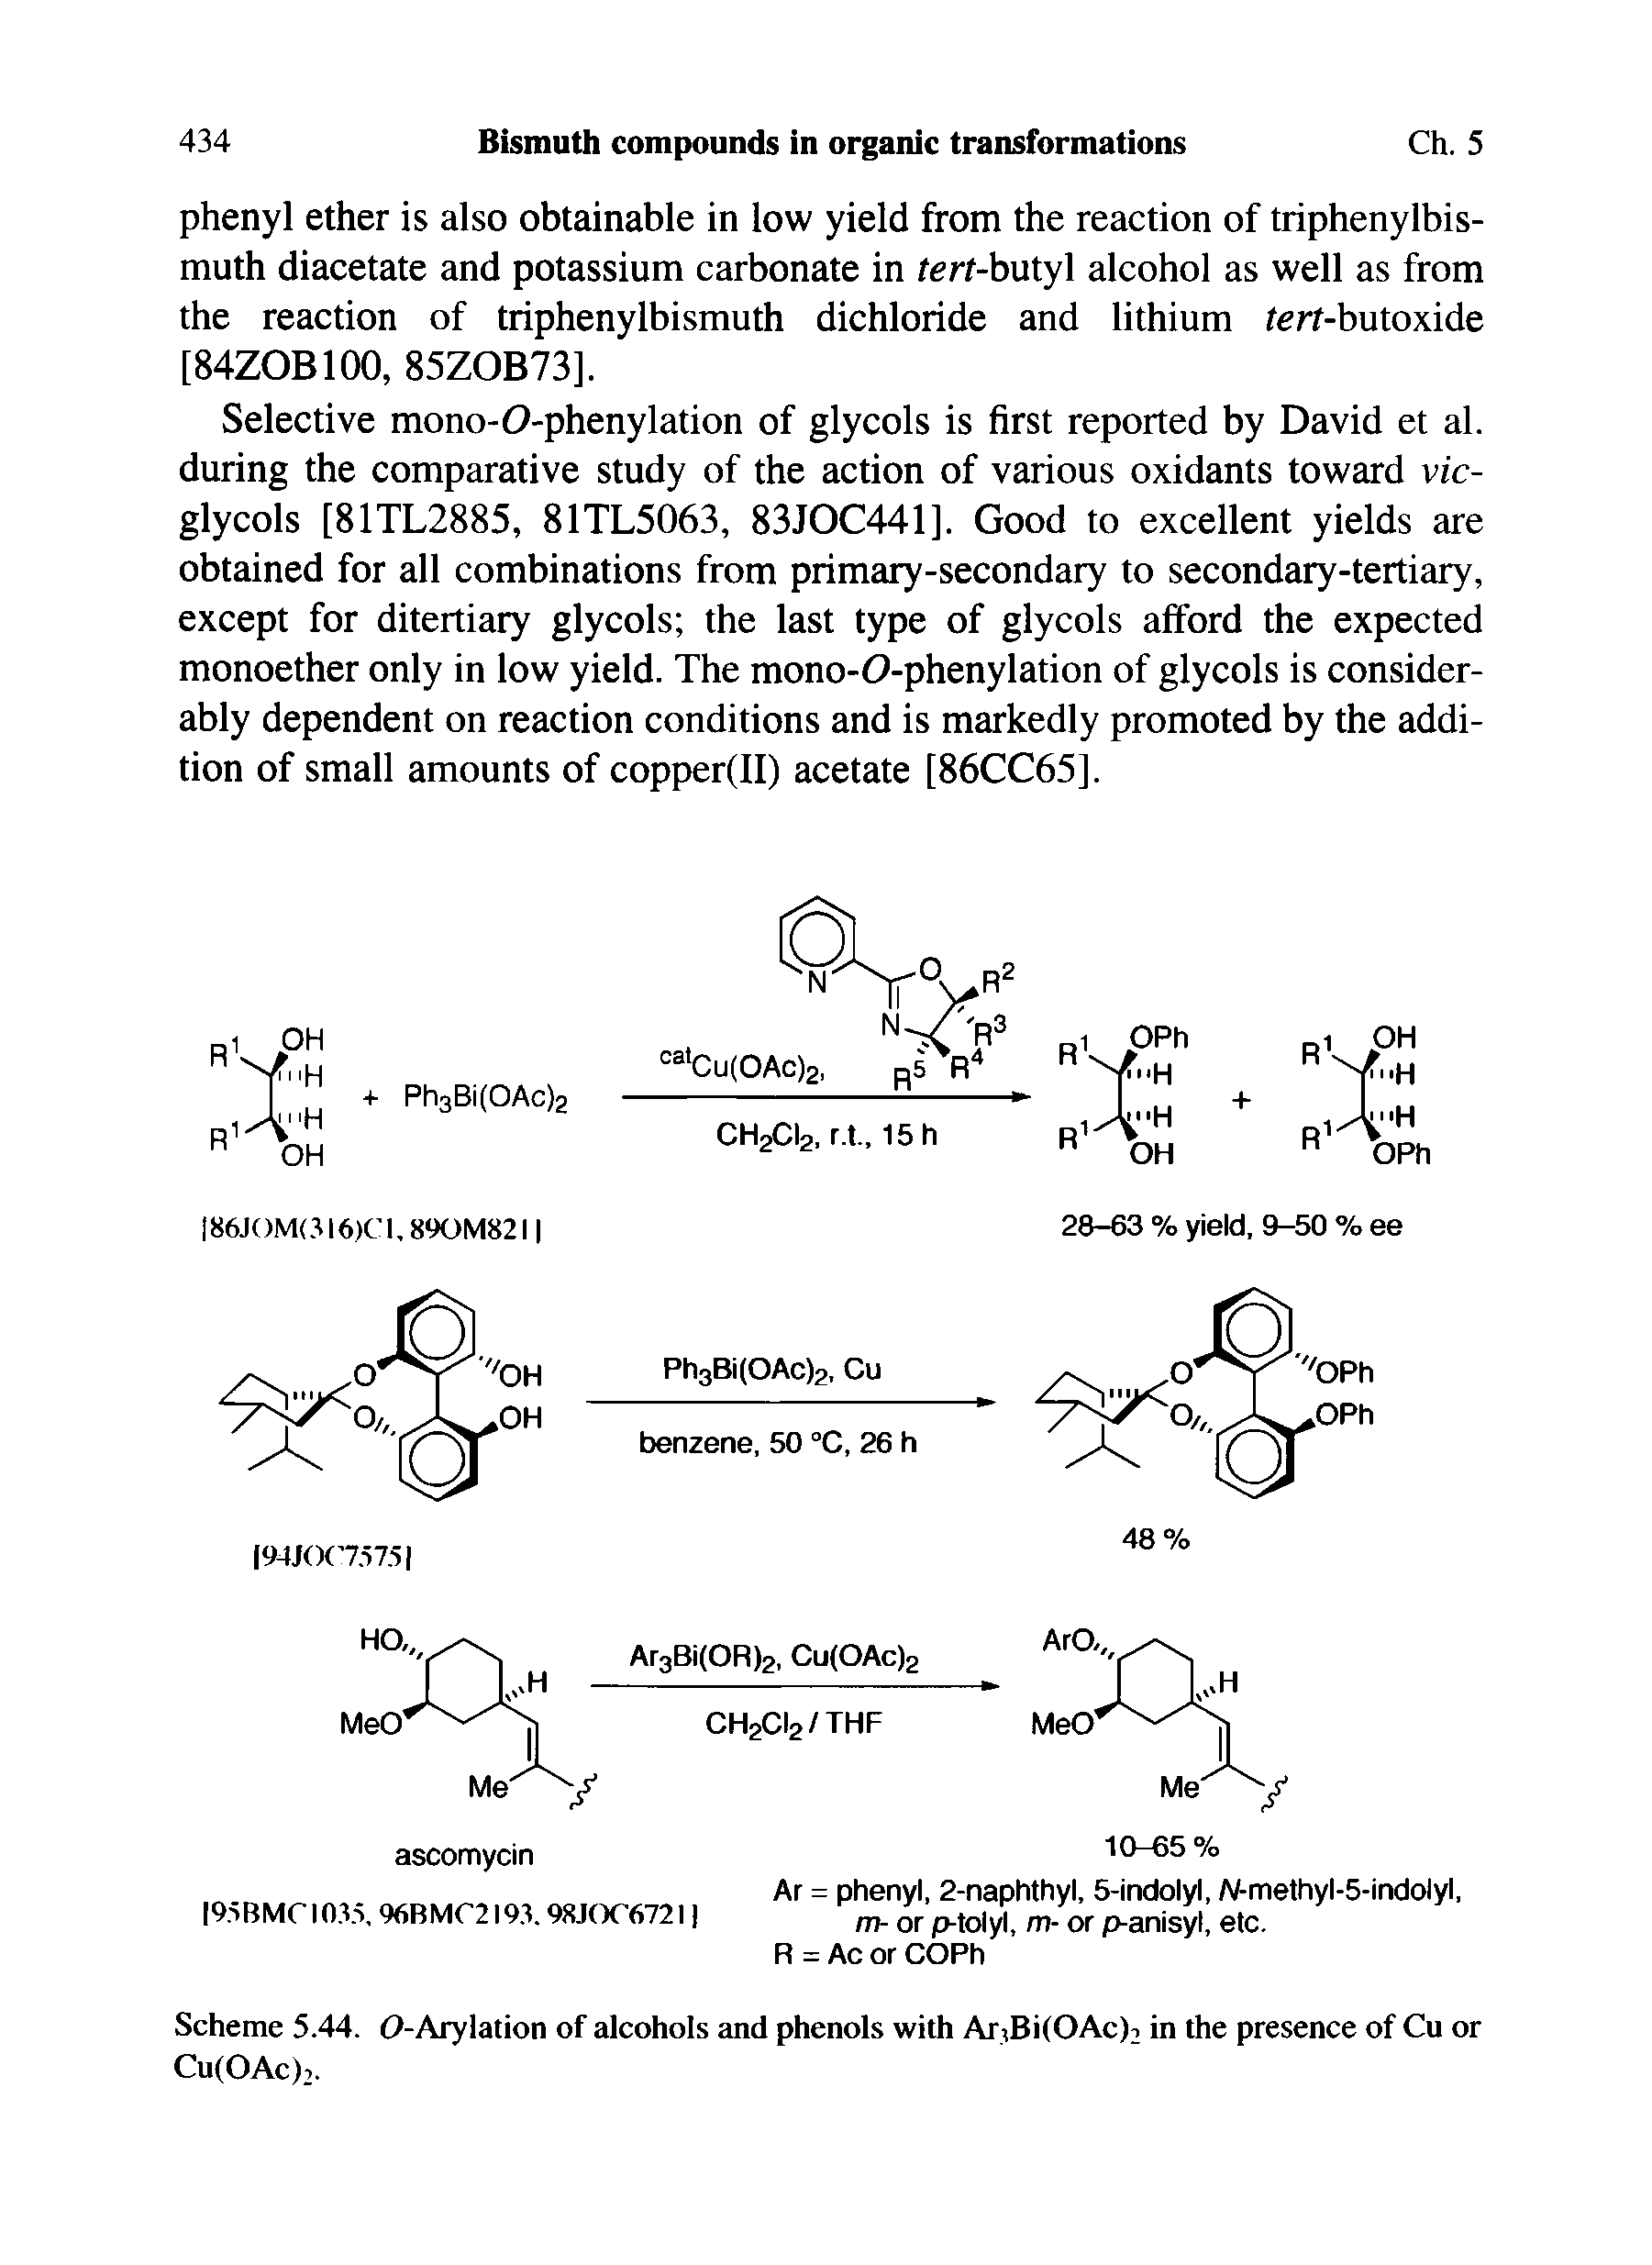 Scheme 5.44. 0-Arylation of alcohols and phenols with Ar,Bi(OAc)2 in the presence of Cu or Cu(OAc)2.